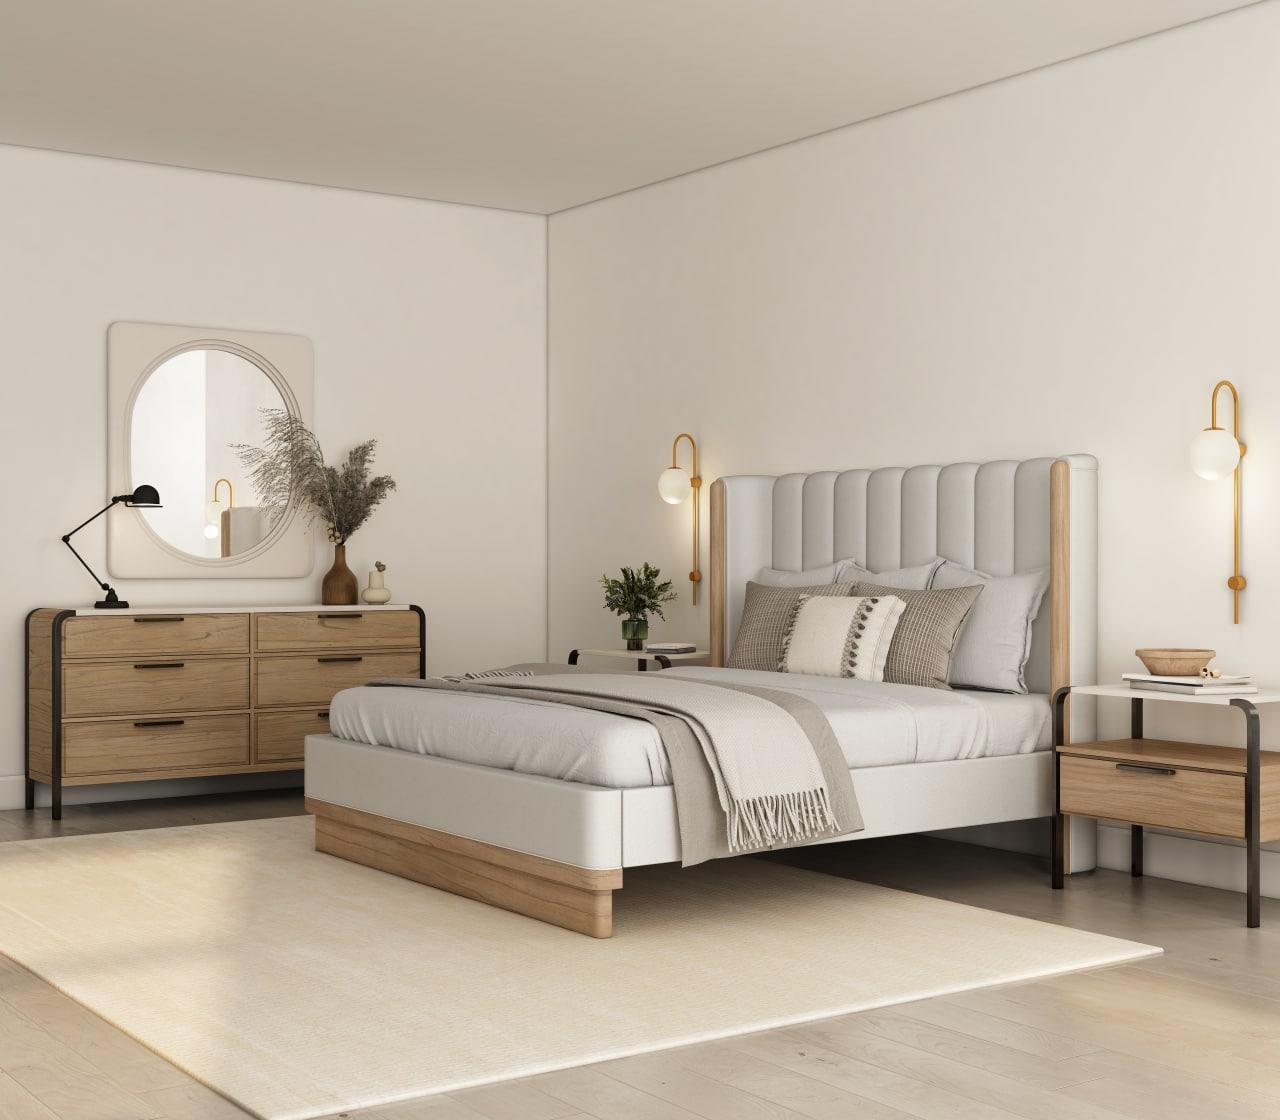 

    
White & Brown C. King Size Bedroom Set 5Pcs by A.R.T. Furniture Portico
